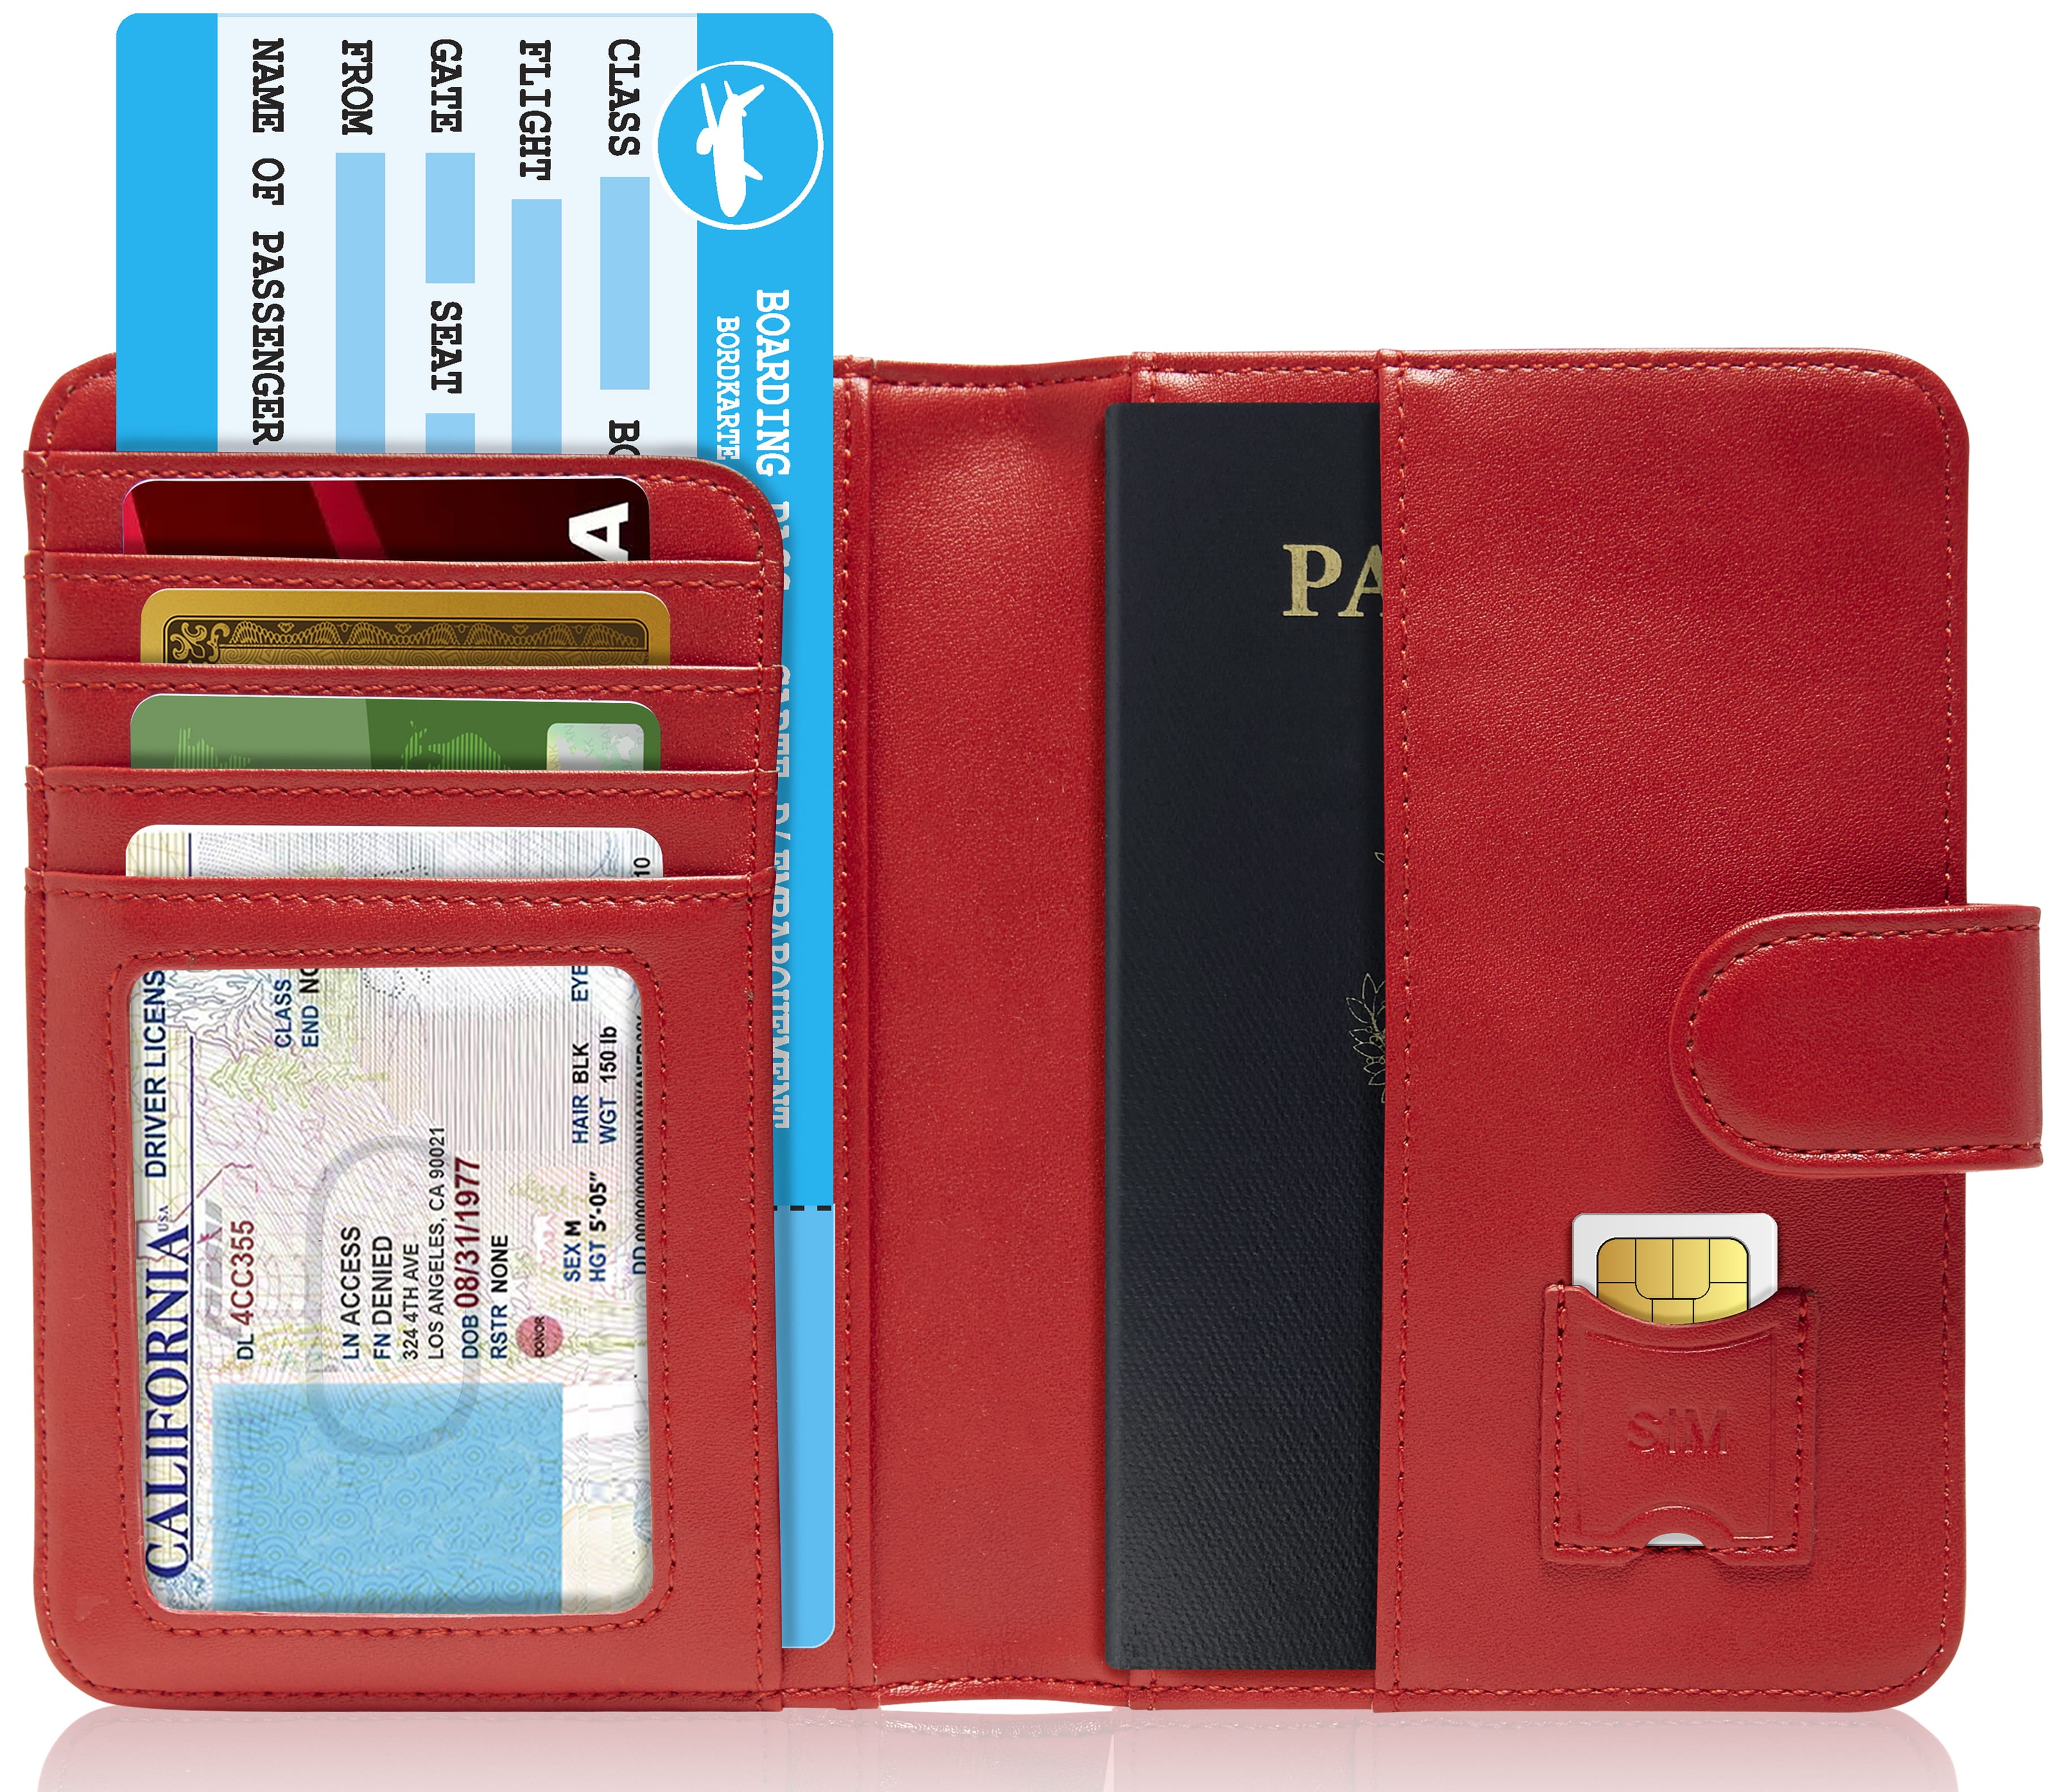 Document and Phone Safe in Traveling Ideal Security Card Case to Keep Your Cash Peicees Travel Wallet Family Passport Holder for Men Women Travel Lanyard Neck Wallet with RFID Card Blocking